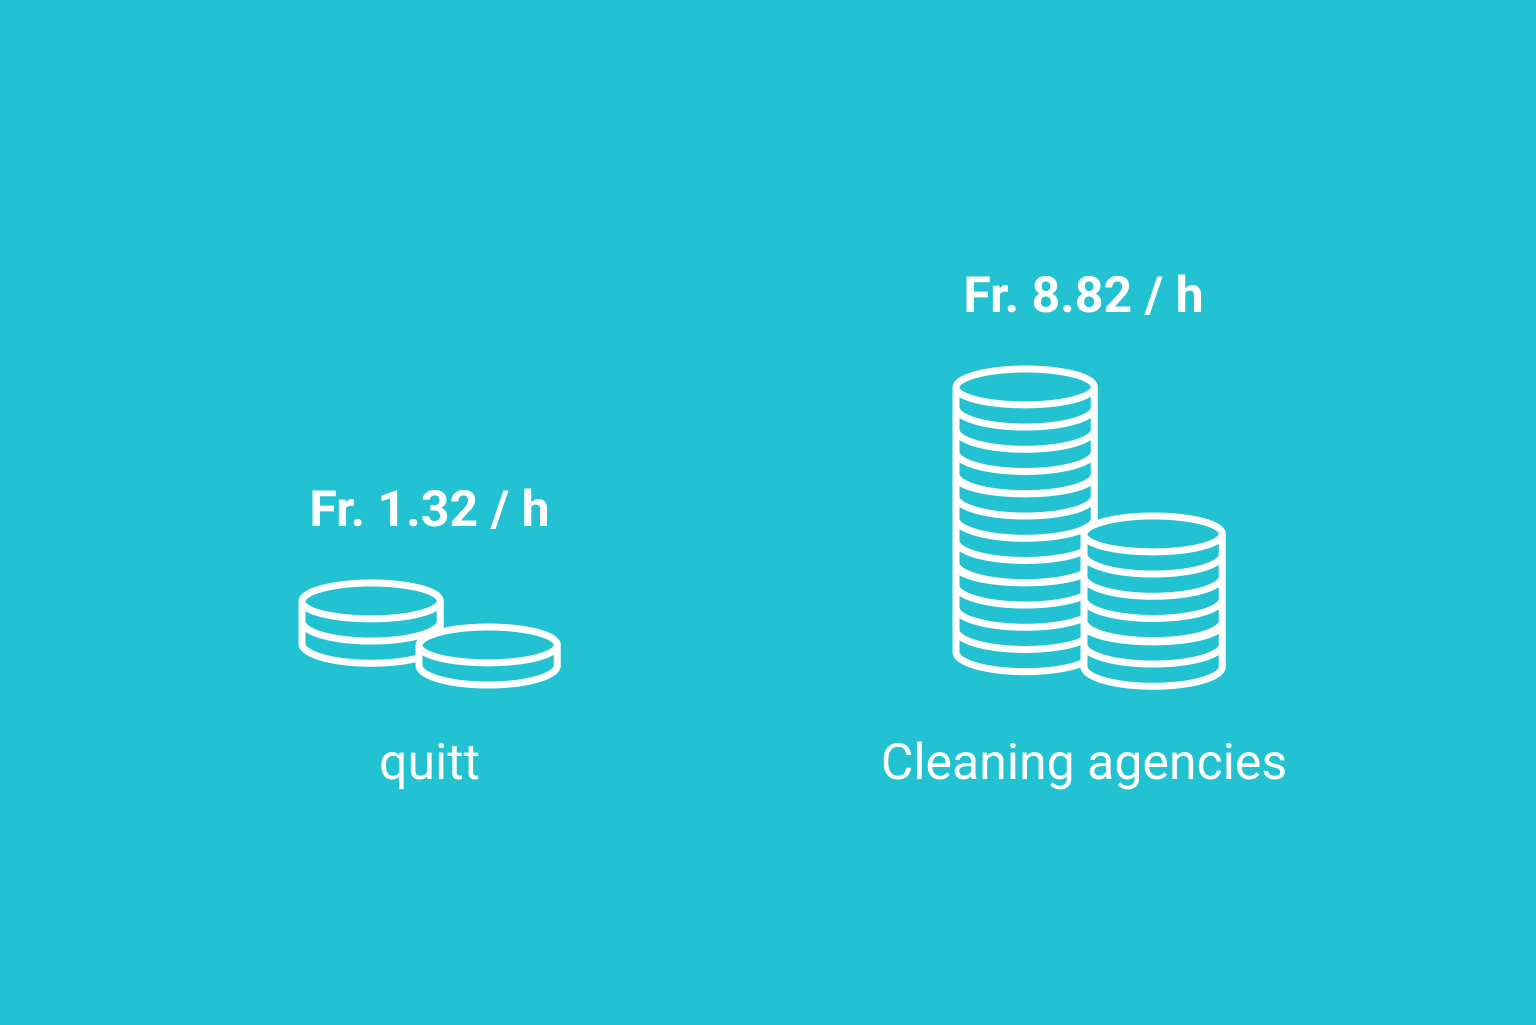 quitt is cheaper than cleaning agencies